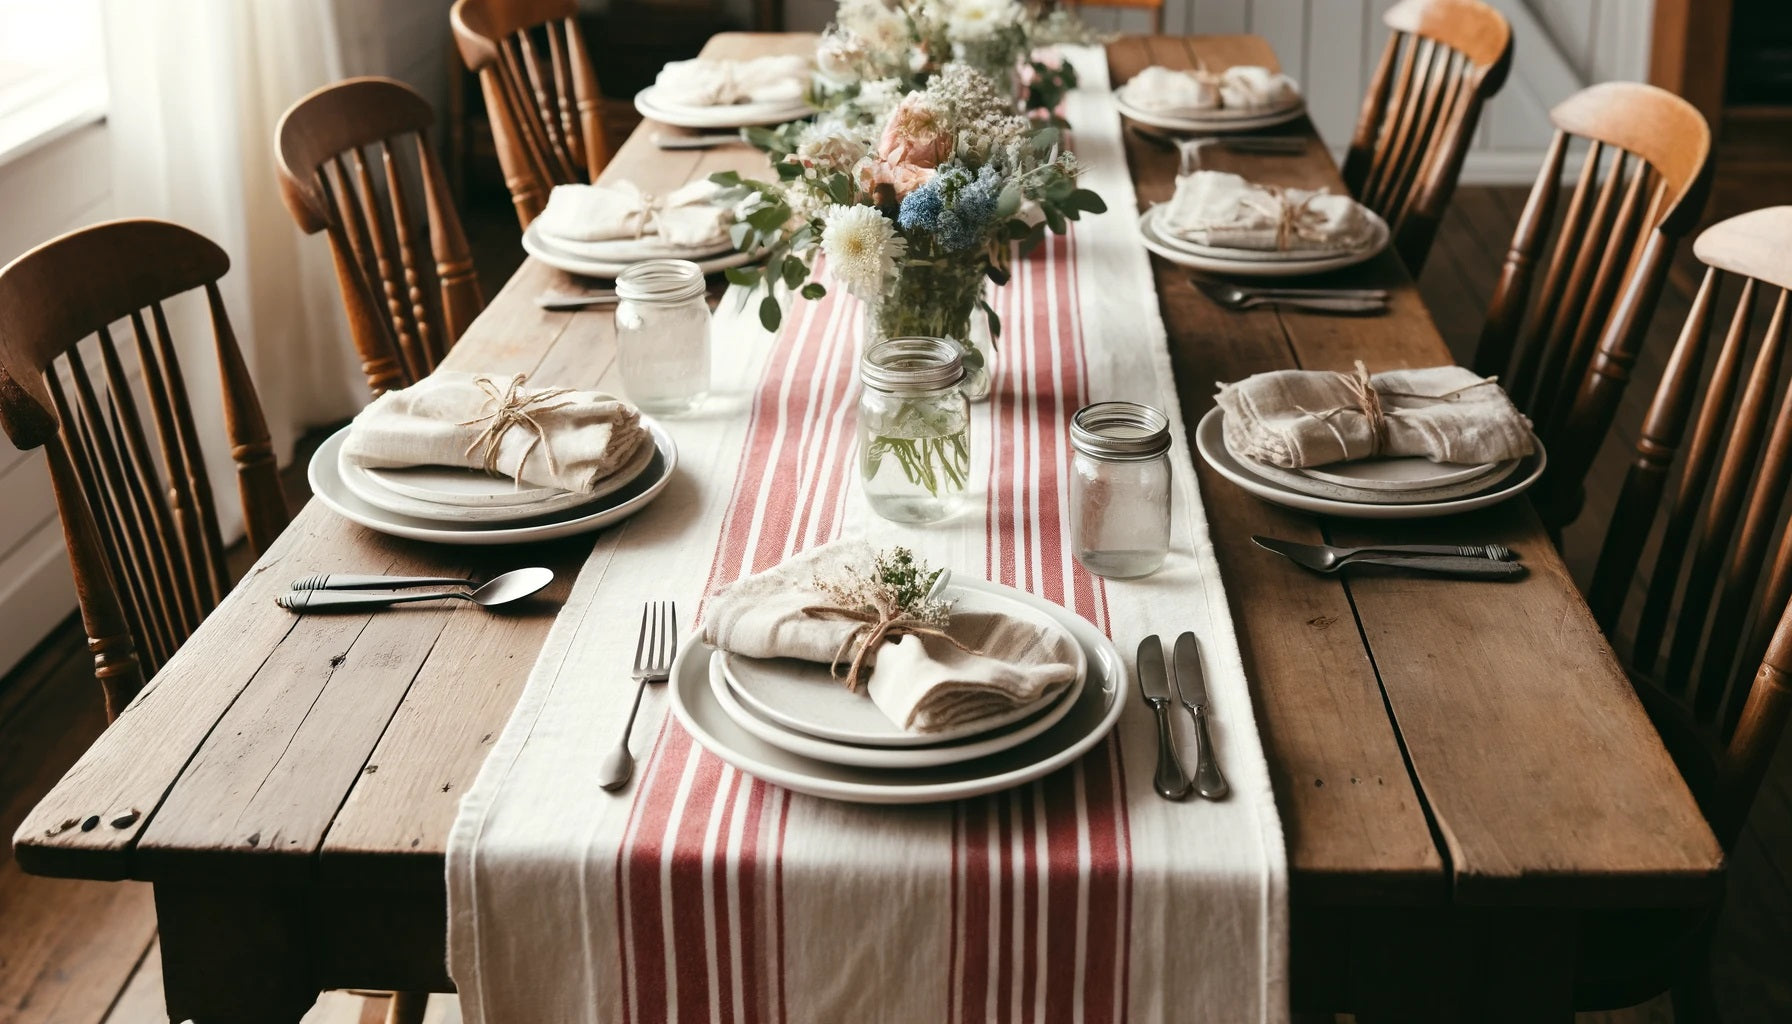  rustic farmhouse dining table set for a meal, featuring a cotton table runner with a red